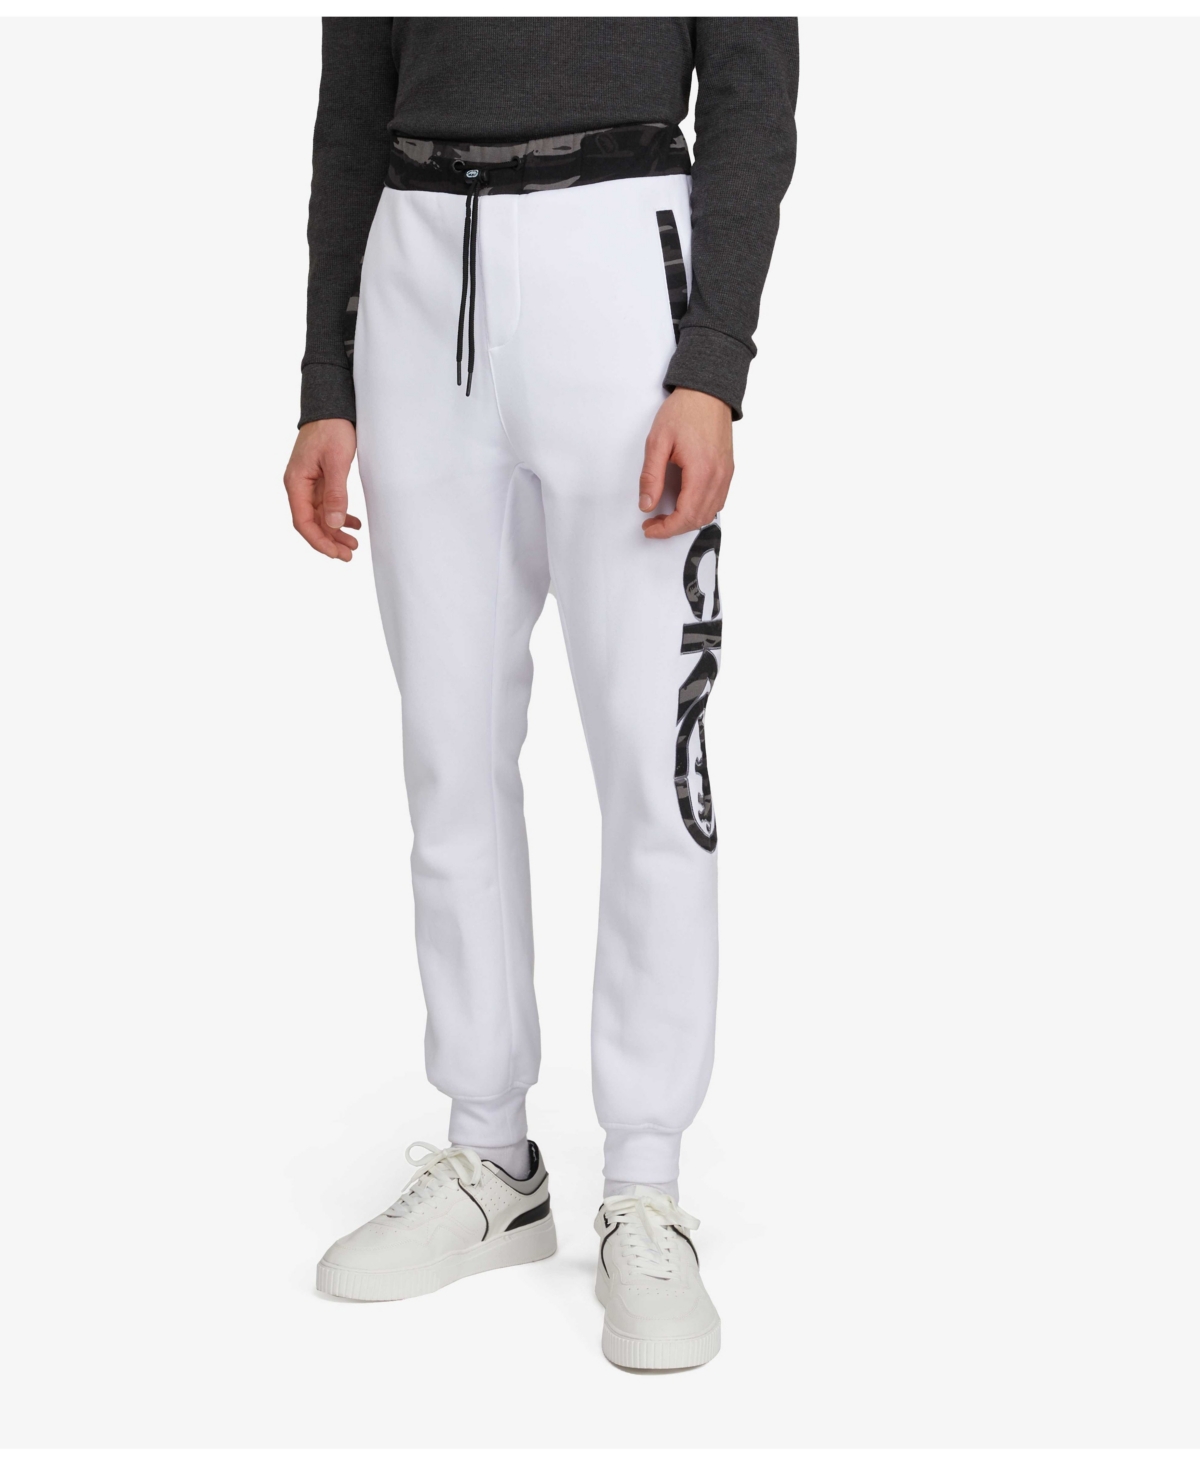 Men's Big and Tall Strongsong Joggers - White